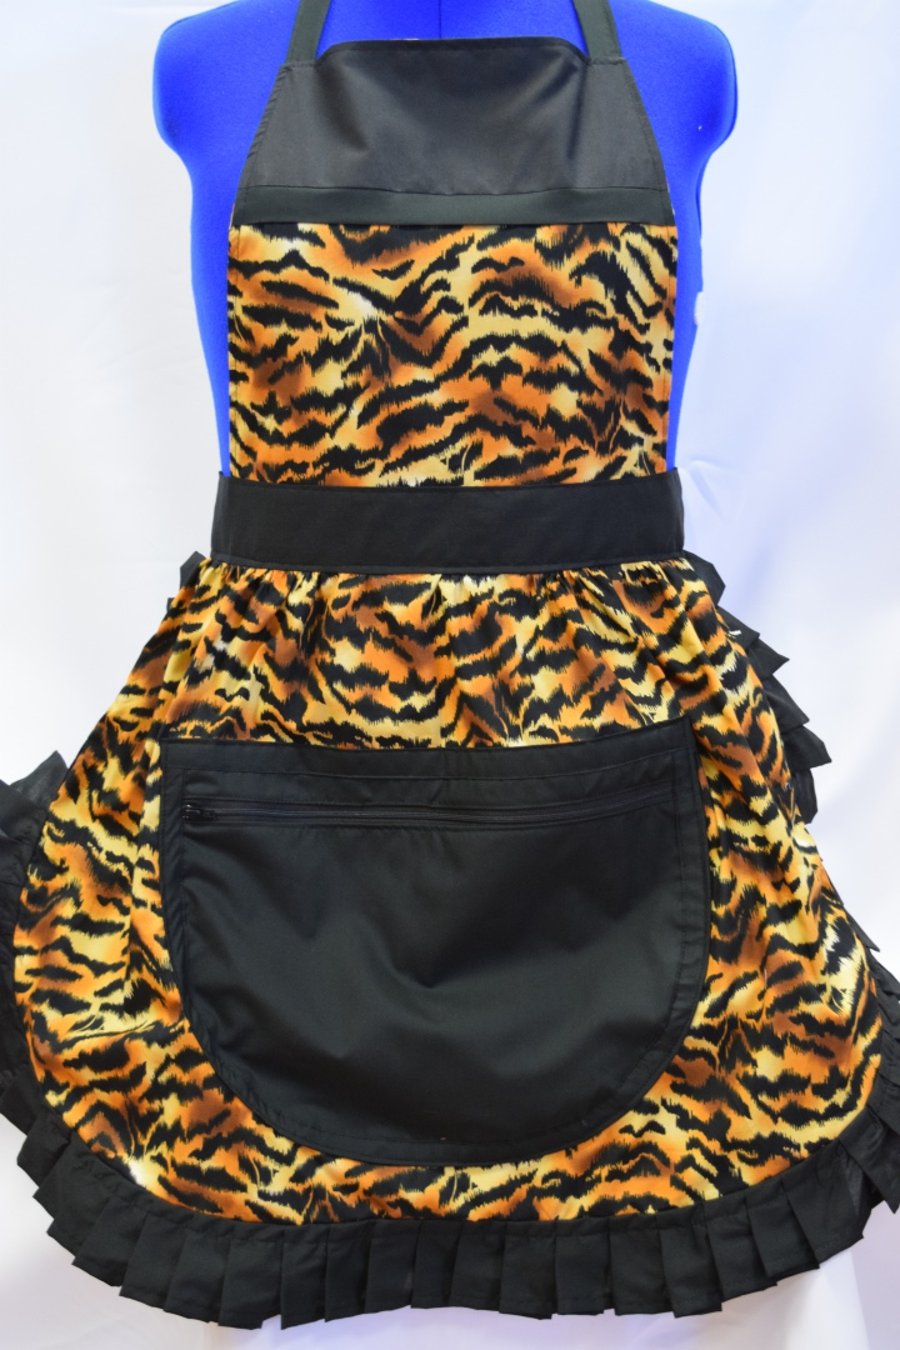 Vintage 50s Style Full Apron Pinny with Large Zipped Pocket - Tiger Stripe Print